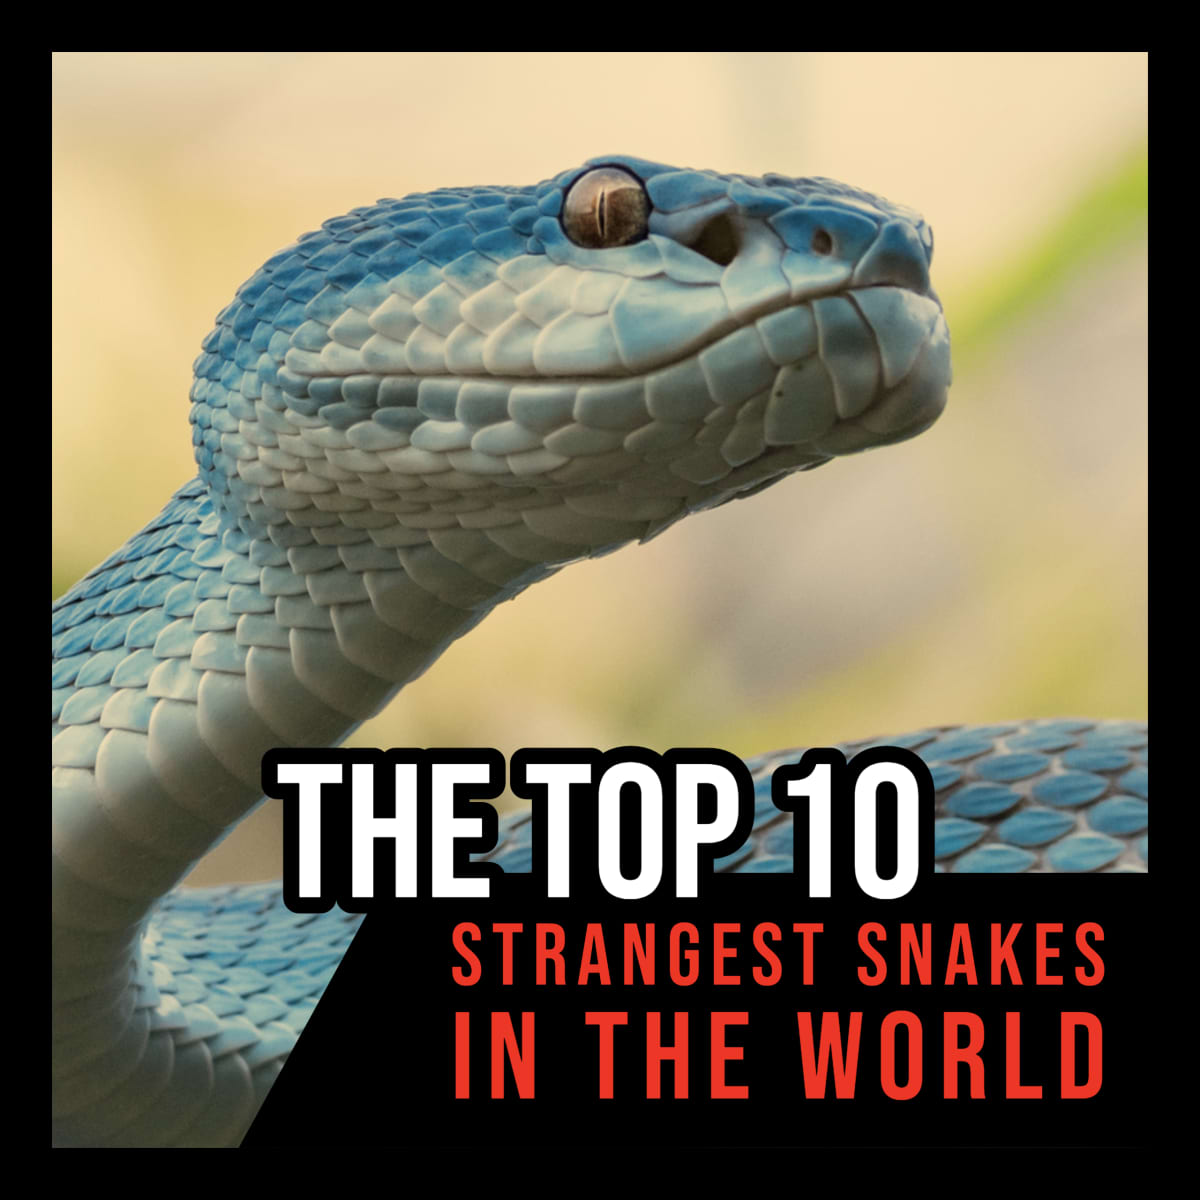 The Top 10 Strangest Snakes in the World - Owlcation